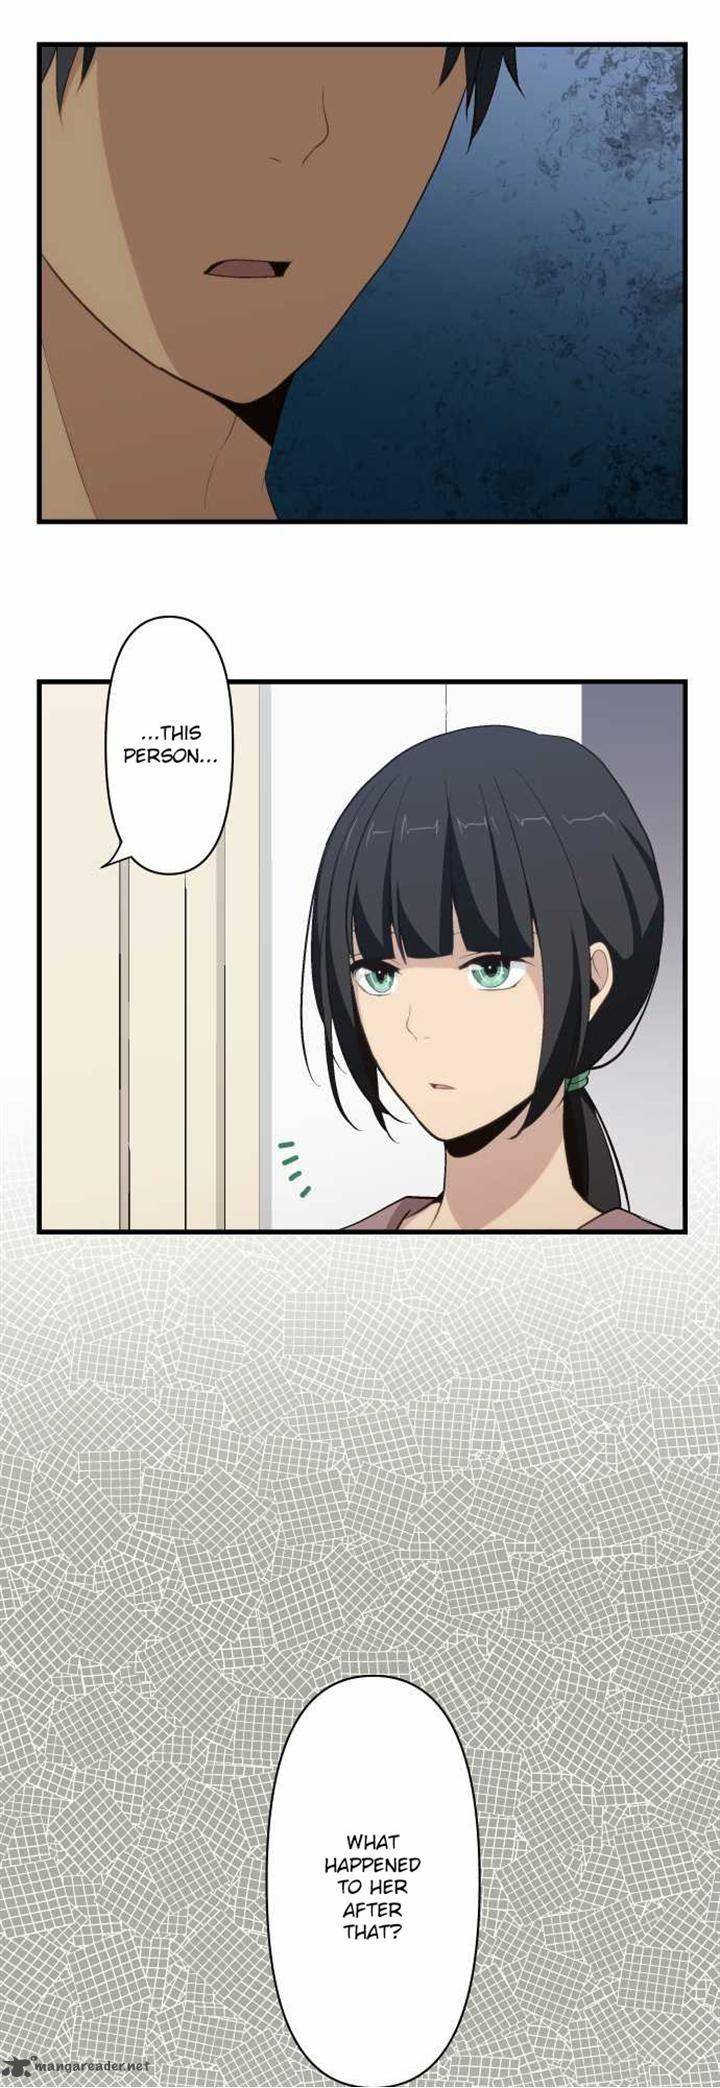 Relife 71 17